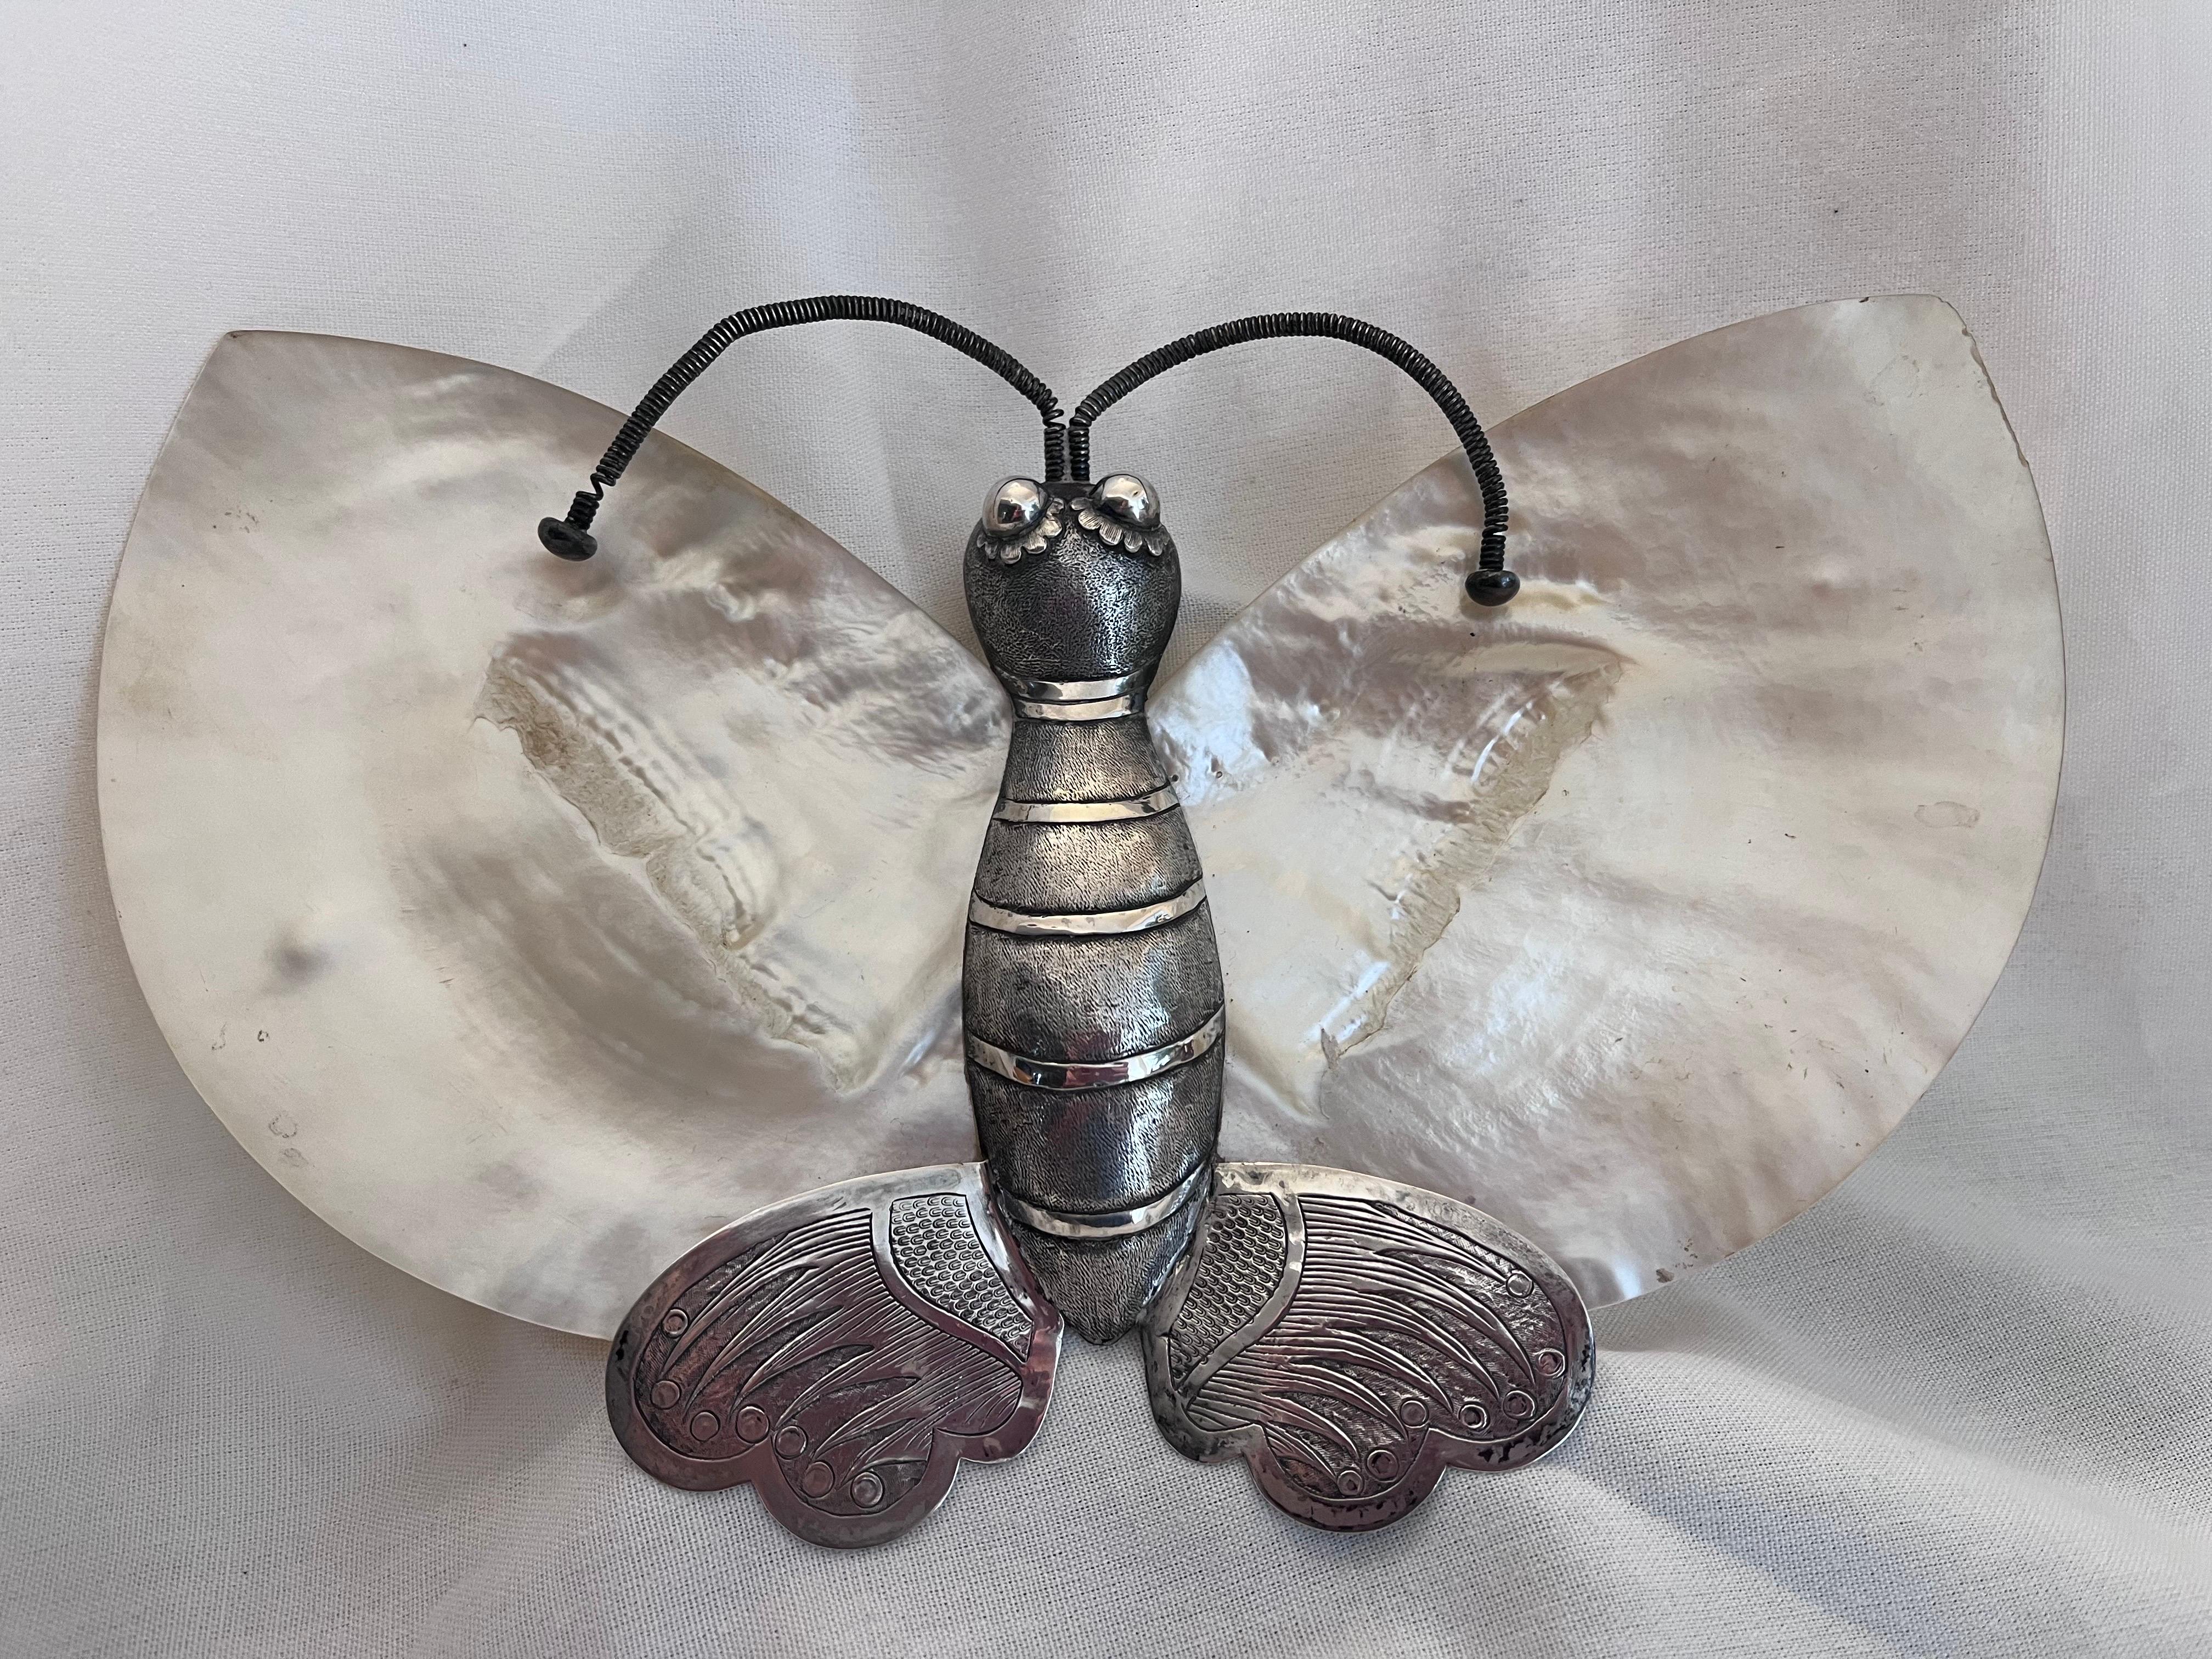 An antique silver and pinctada shell Chinese sweetmeat or caviar serving dish in the style of Kwan Wo. The double pinctada (a pearl oyster species) shell wings are gently formed with a delicate point on either top of the wing. The body is silver